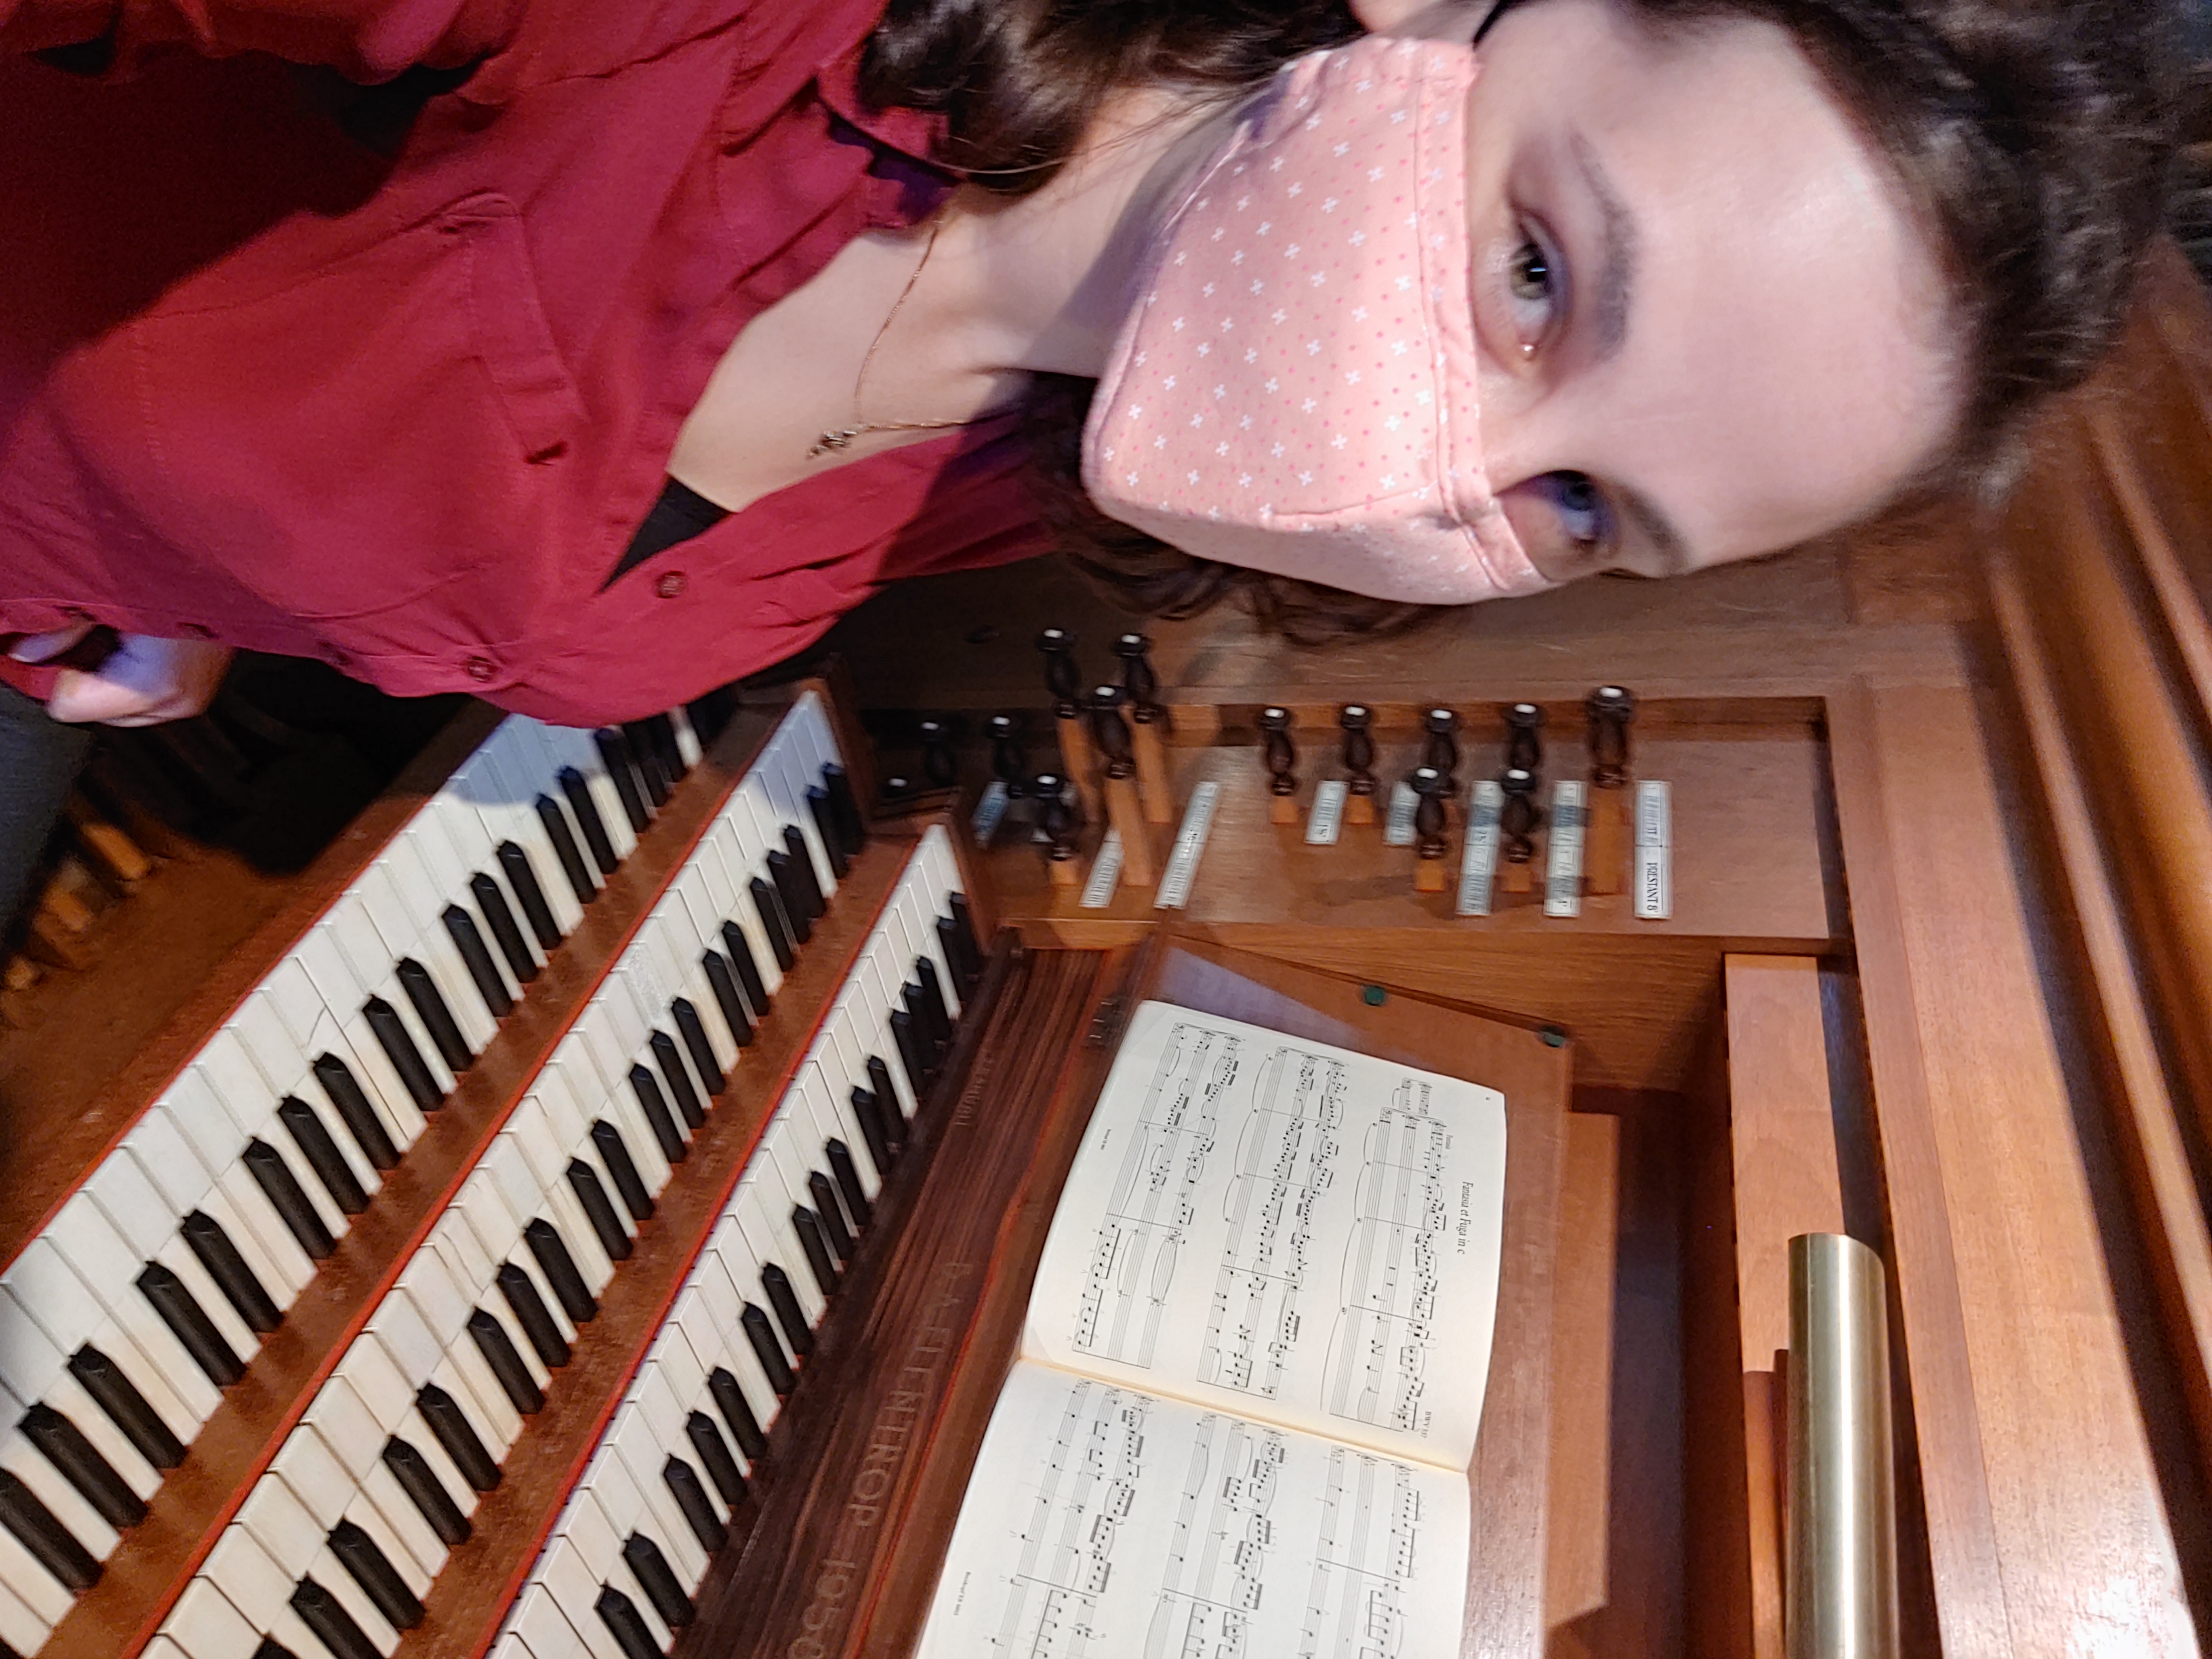 Me wearing a pink mask sitting at the organ console in Busch Hall at Harvard.